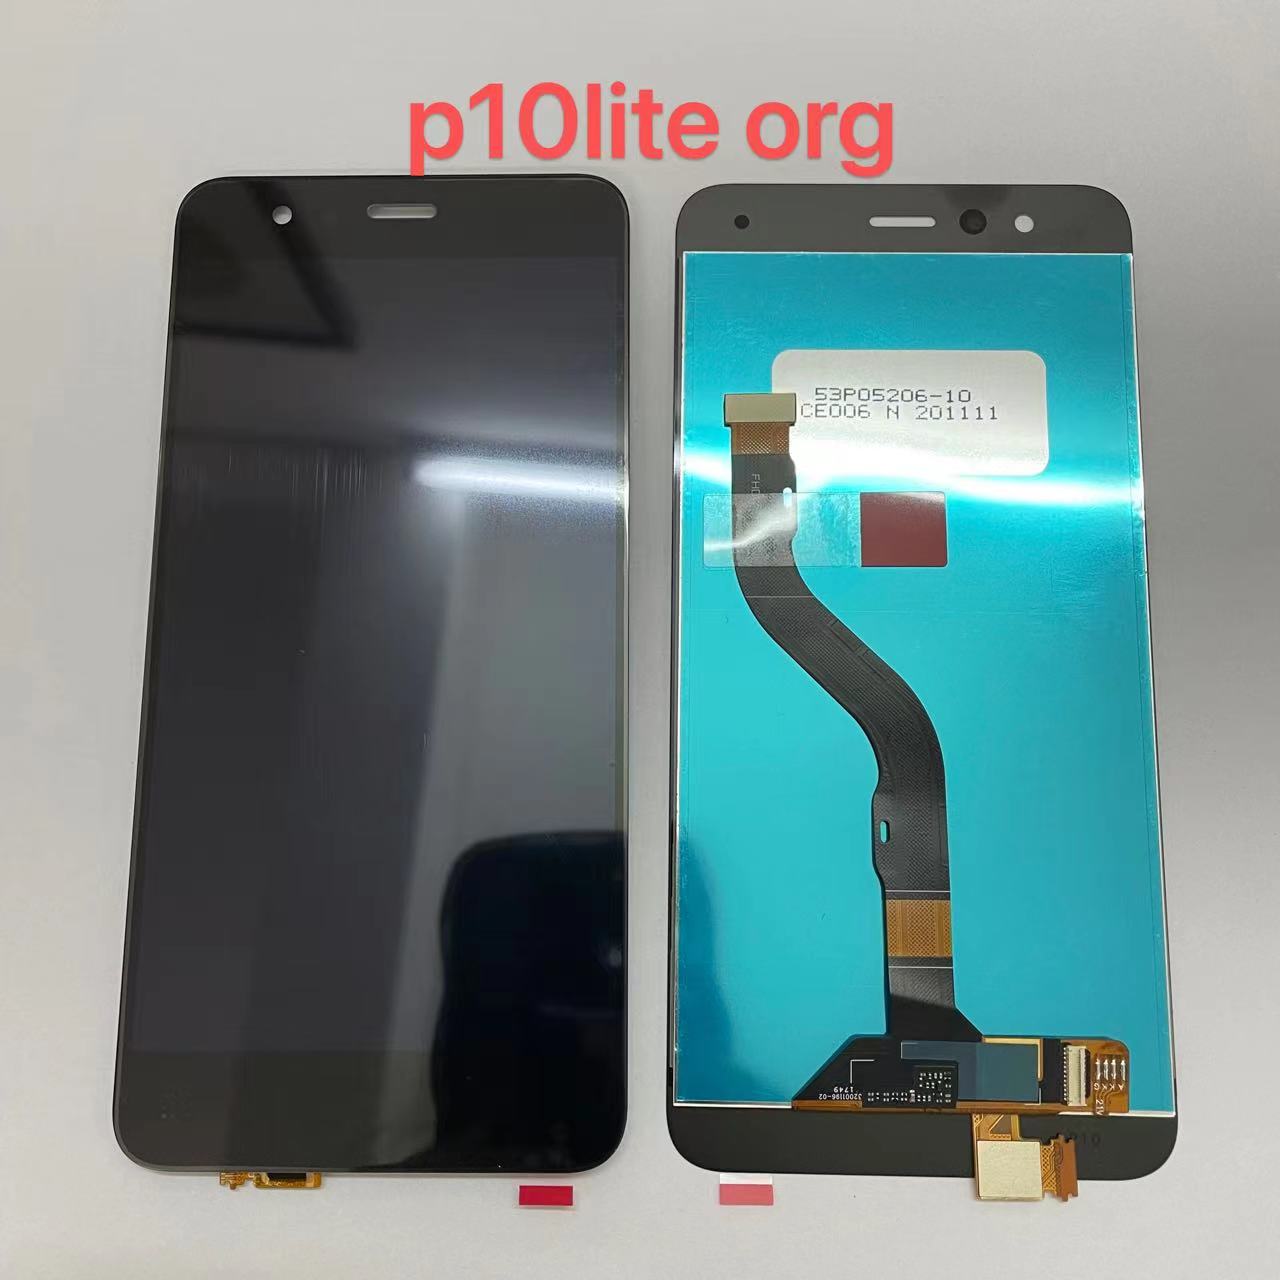 For HUAWEI P10 Lite ORG Lcd Screen display and Lcd Screen replacement